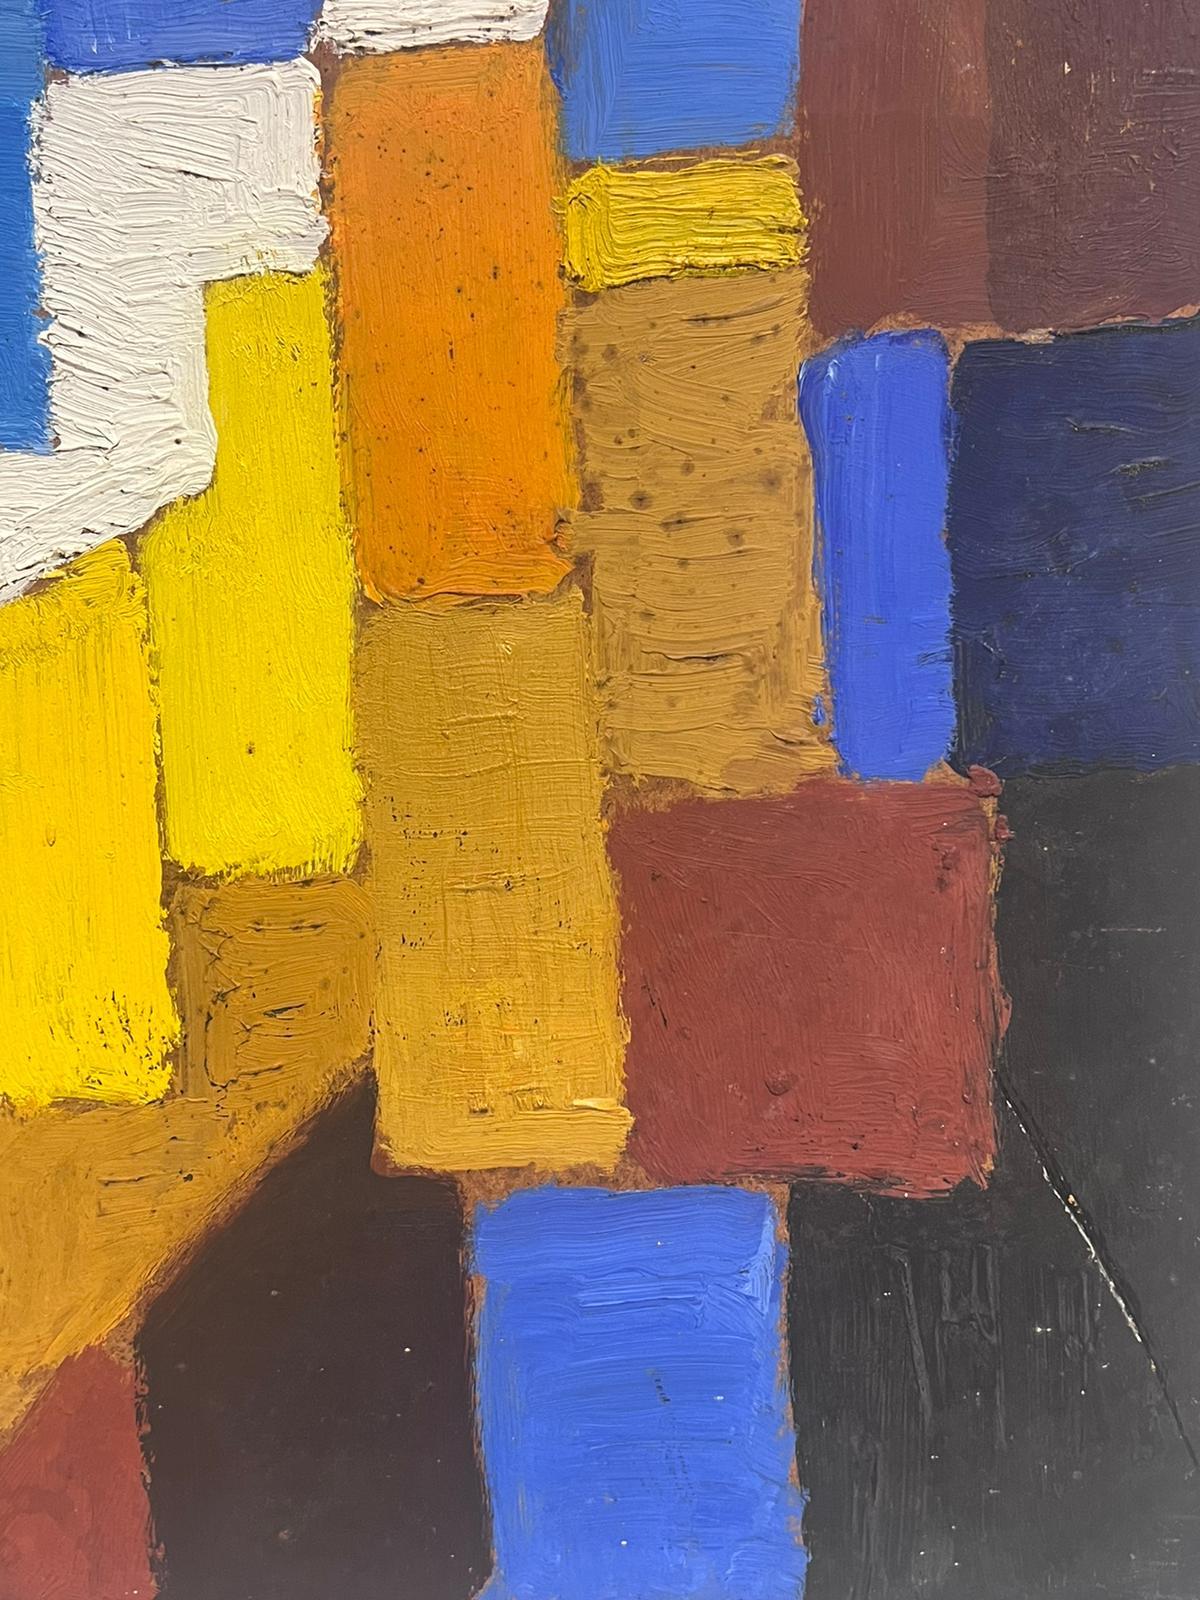 20th Century French Cubist Oil Painting Blues Oranges Yellow & Beige Cubes For Sale 4